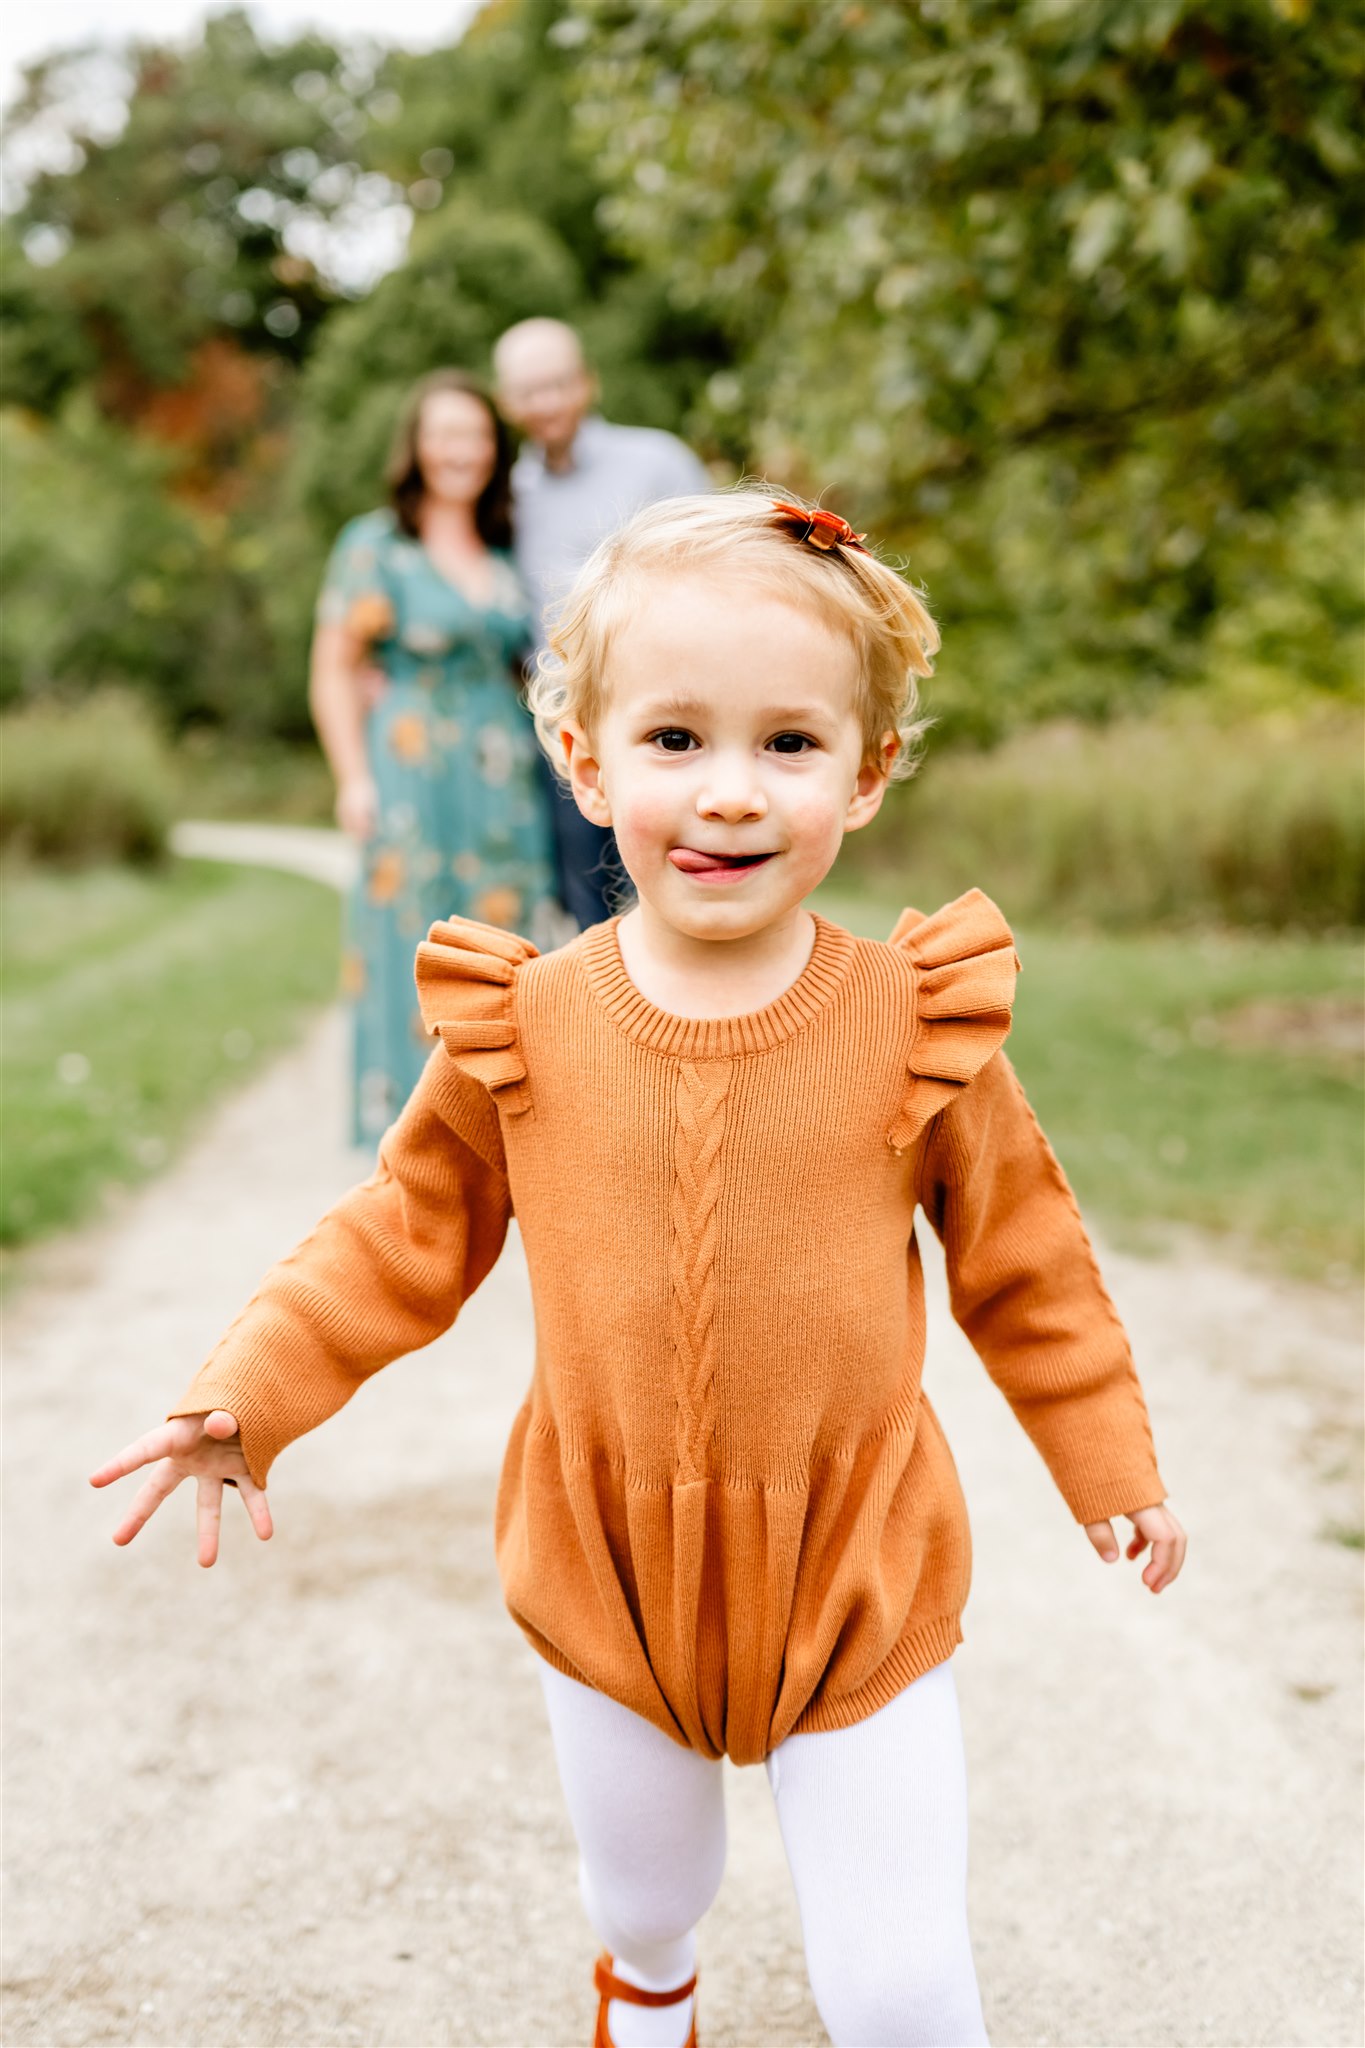 A young toddler in an orange dress walks down a park trail away from mom and dad